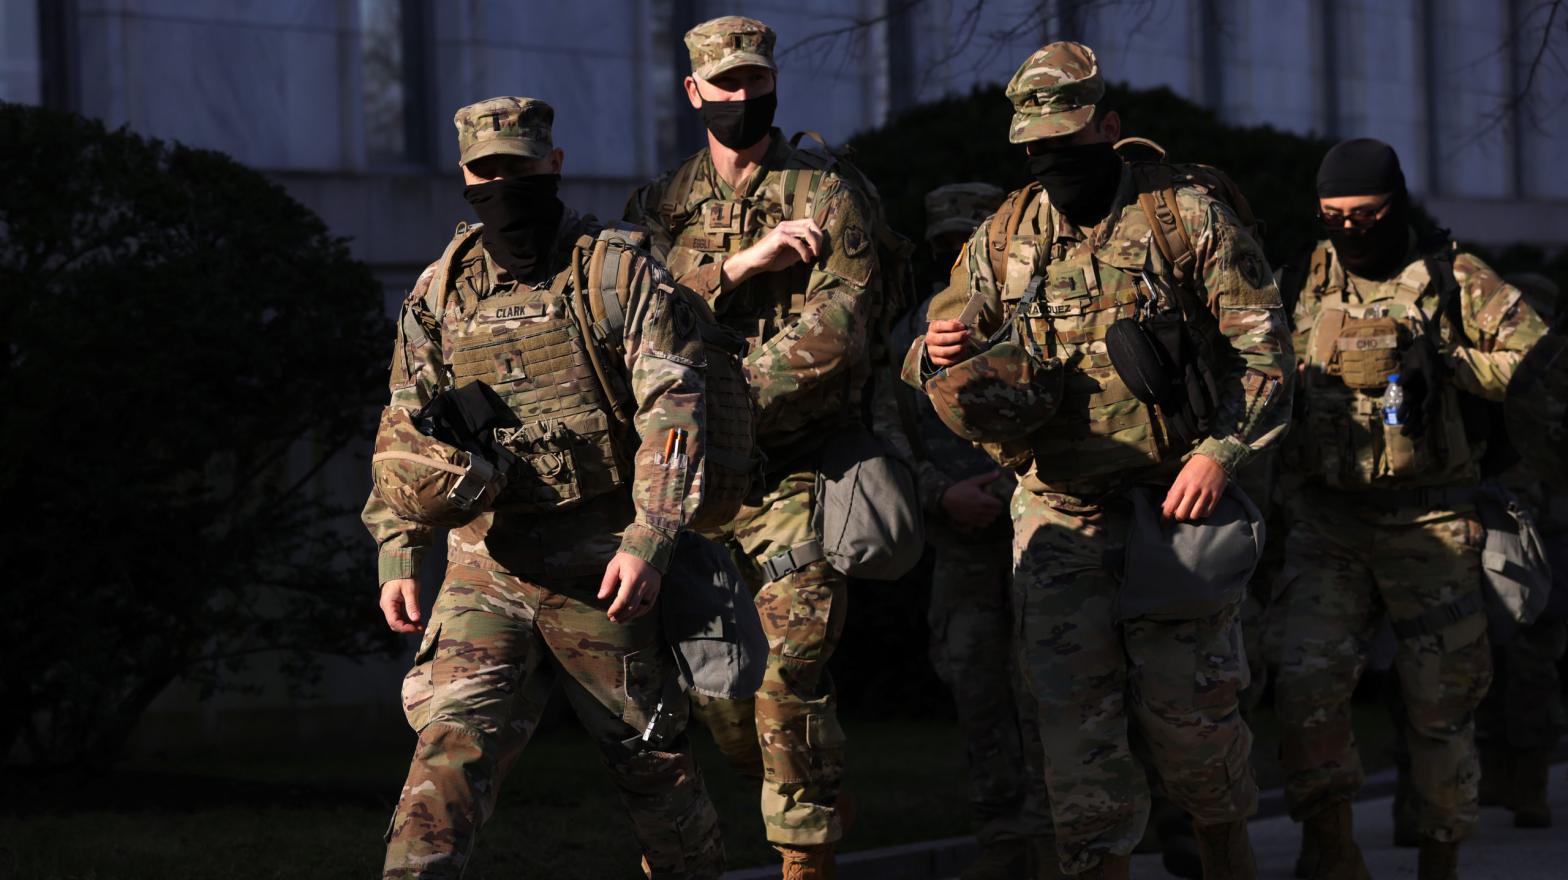 Members of the National Guard remain deployed in Washington, DC in March following deadly riots involving scores of QAnon conspiracy theorists at the Capitol on Jan. 6.  (Photo: Alex Wong, Getty Images)